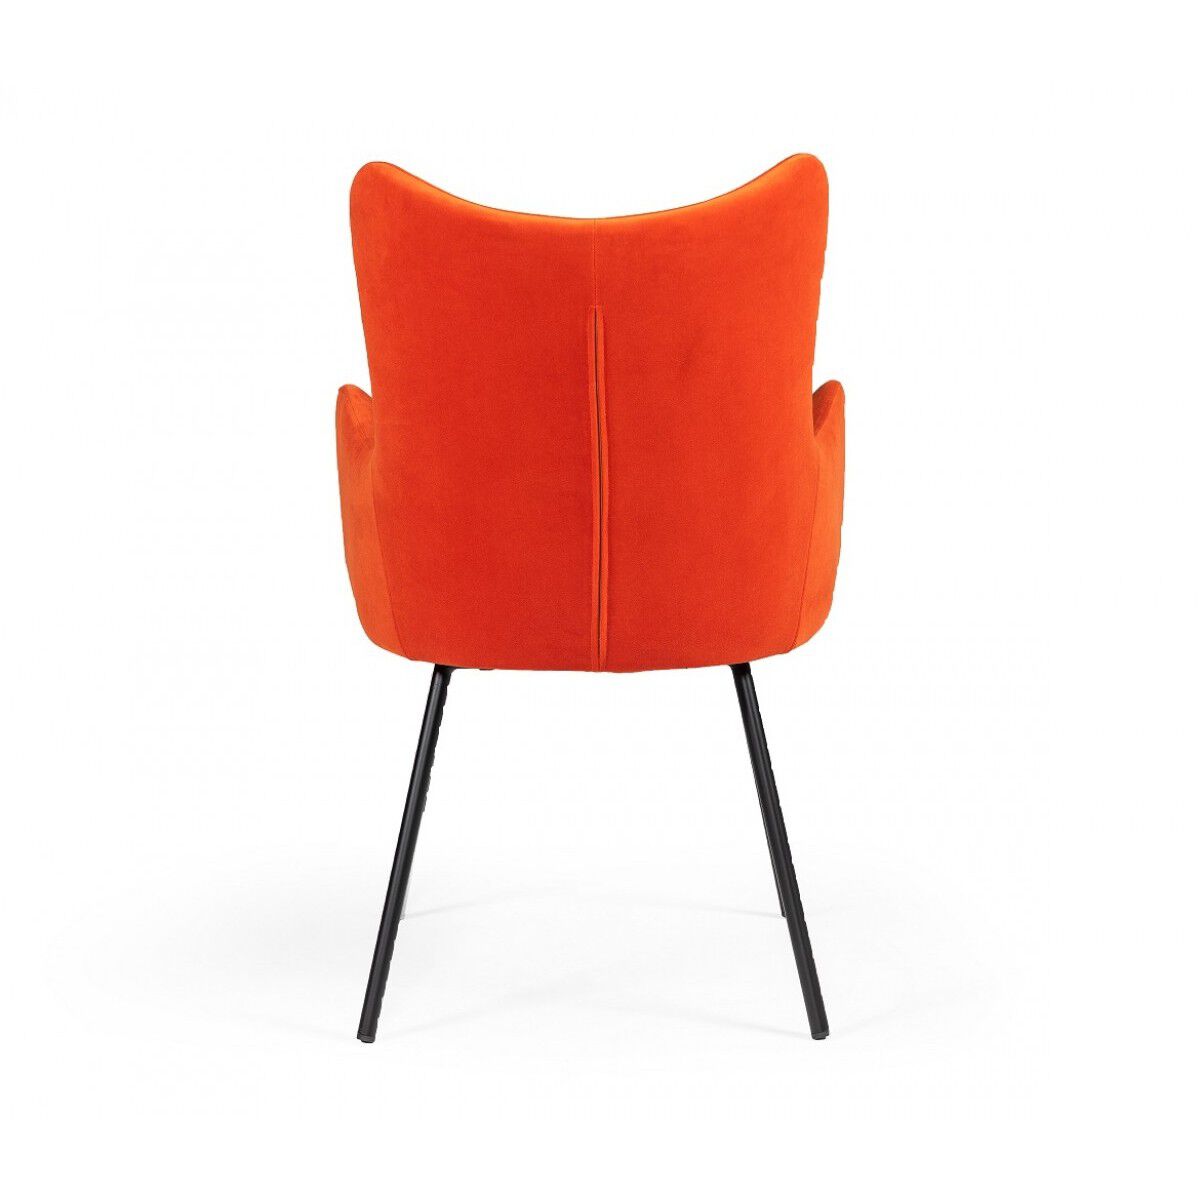 Fabric Upholstered Dining Chair with Winged Back and Curved Arms, Orange